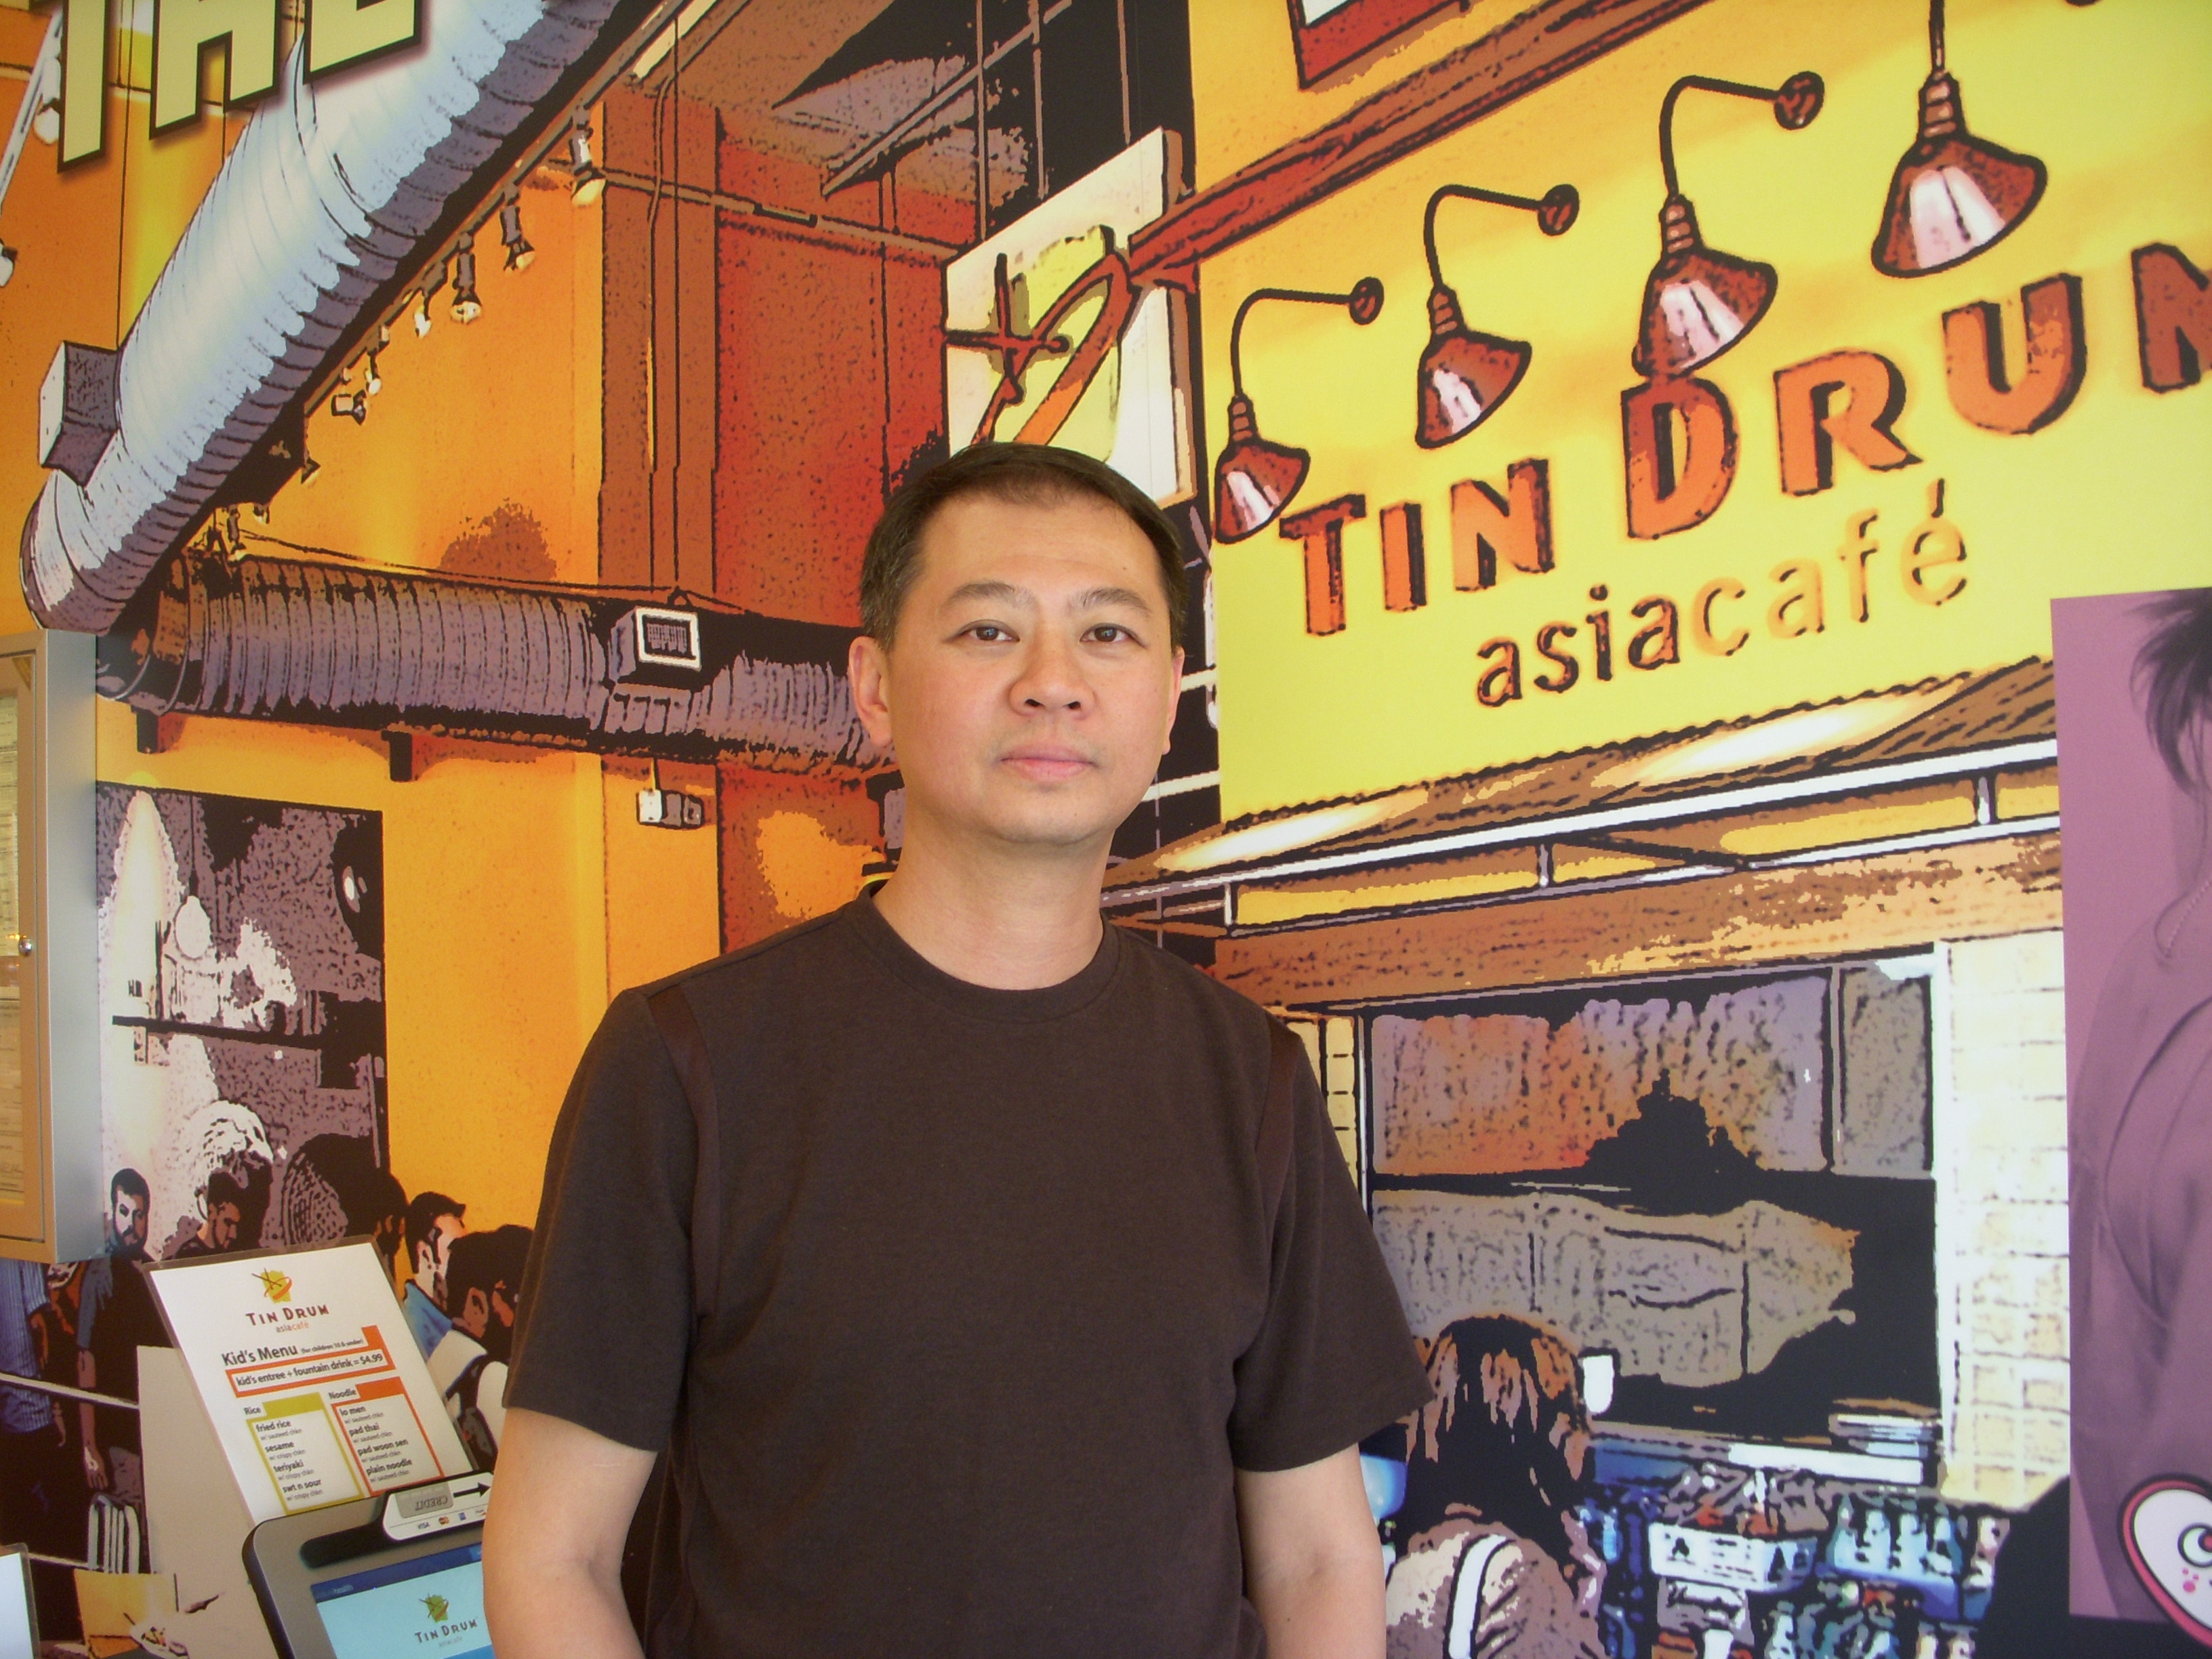 Steven Chan Tin Drum Asiacafe CEO